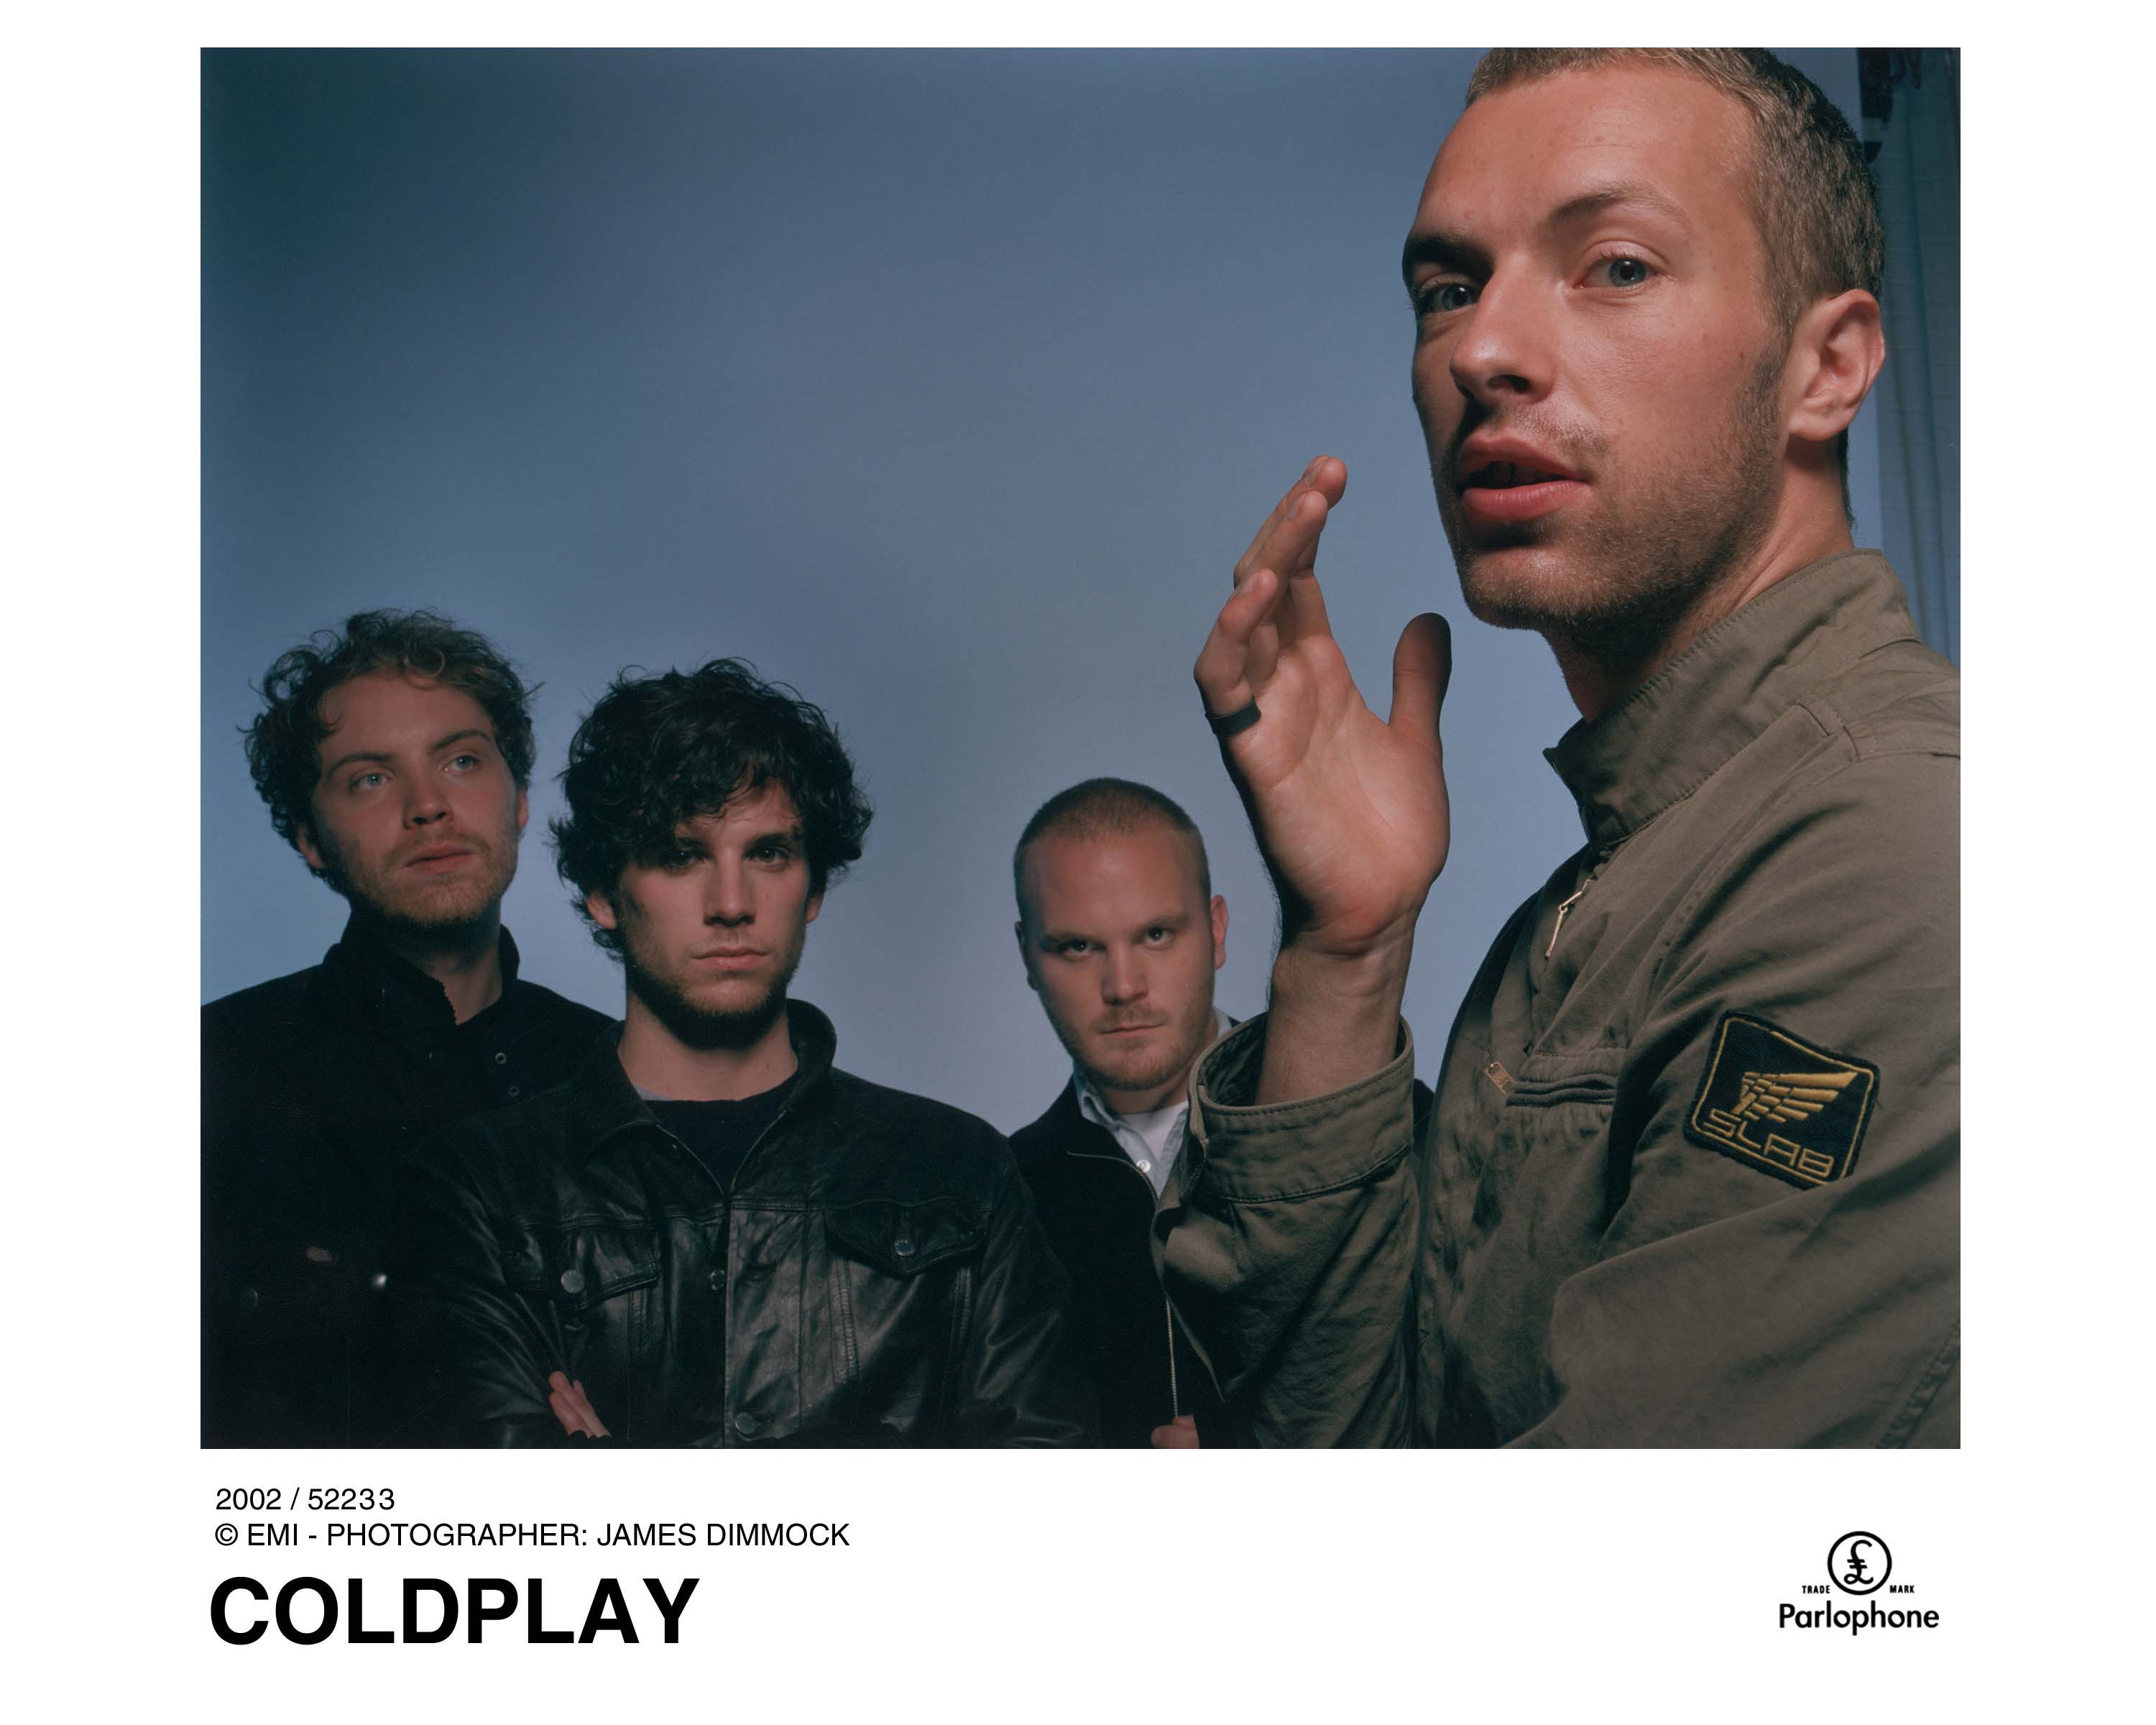 CLICK HERE - COLDPLAY: The Light of Music, Passion, and Development!